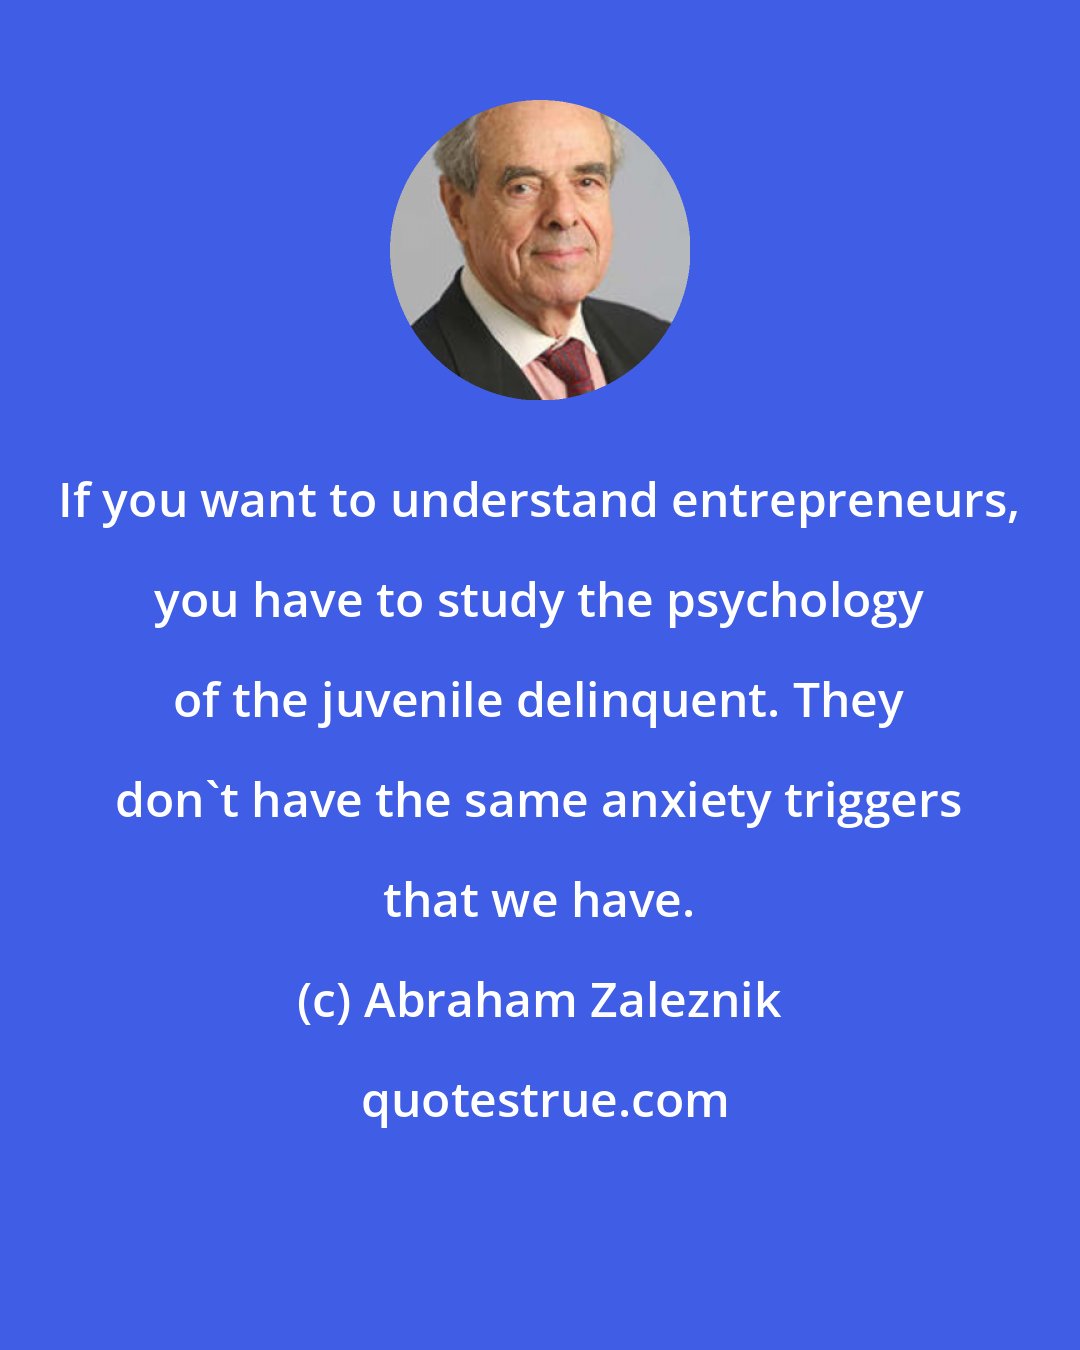 Abraham Zaleznik: If you want to understand entrepreneurs, you have to study the psychology of the juvenile delinquent. They don't have the same anxiety triggers that we have.